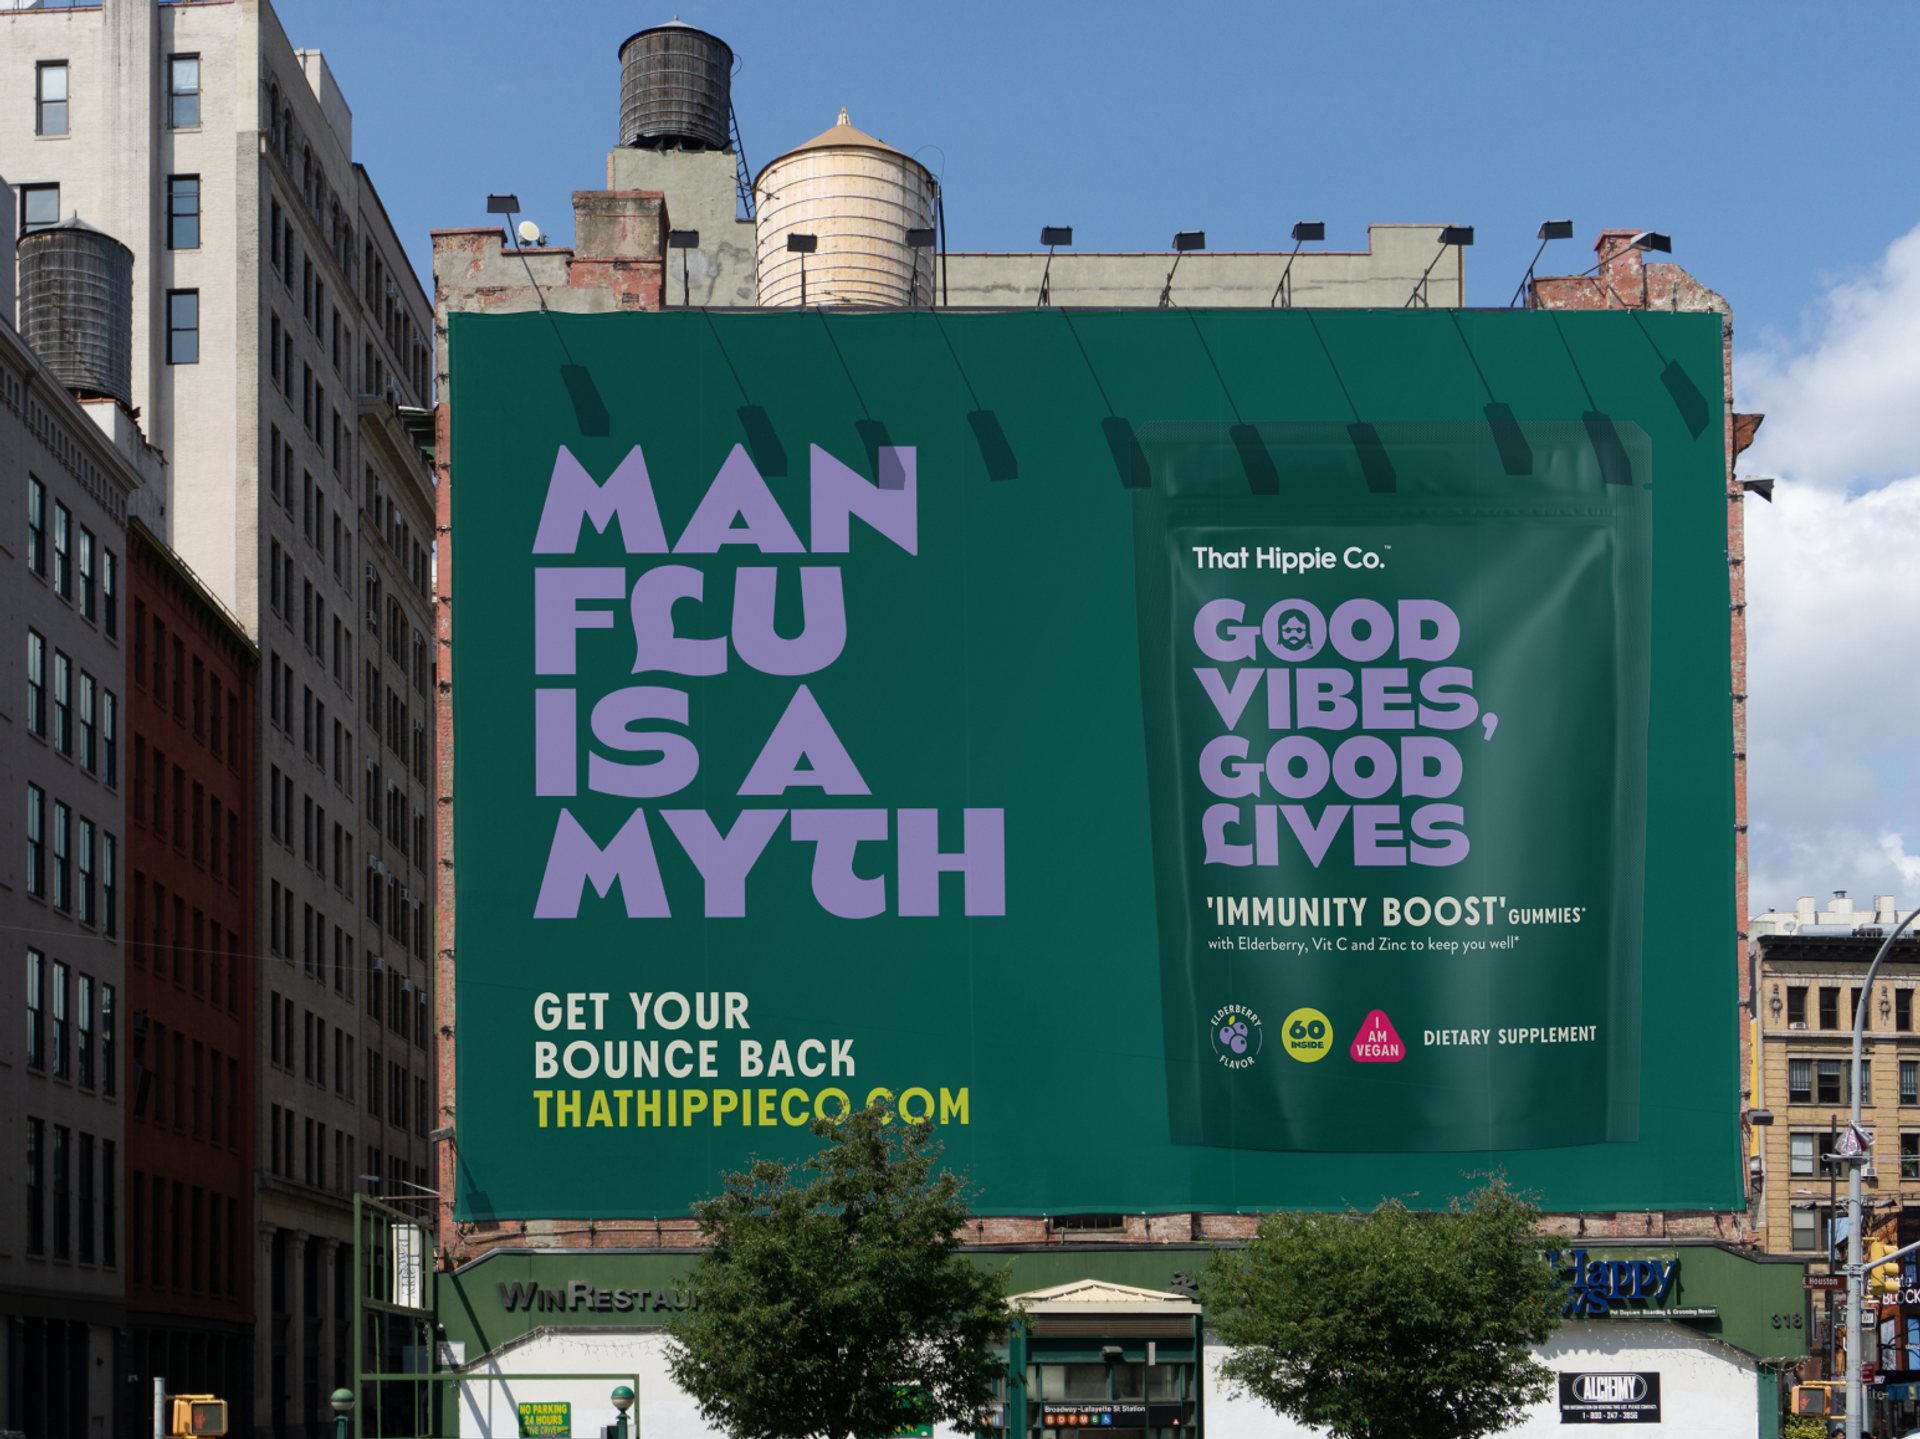 Billboard poster design by branding agency Sydney Our Revolution for dietary supplement brand That Hippie Co. with slogans “Man flu is a myth” and “Good vibes, good lives”